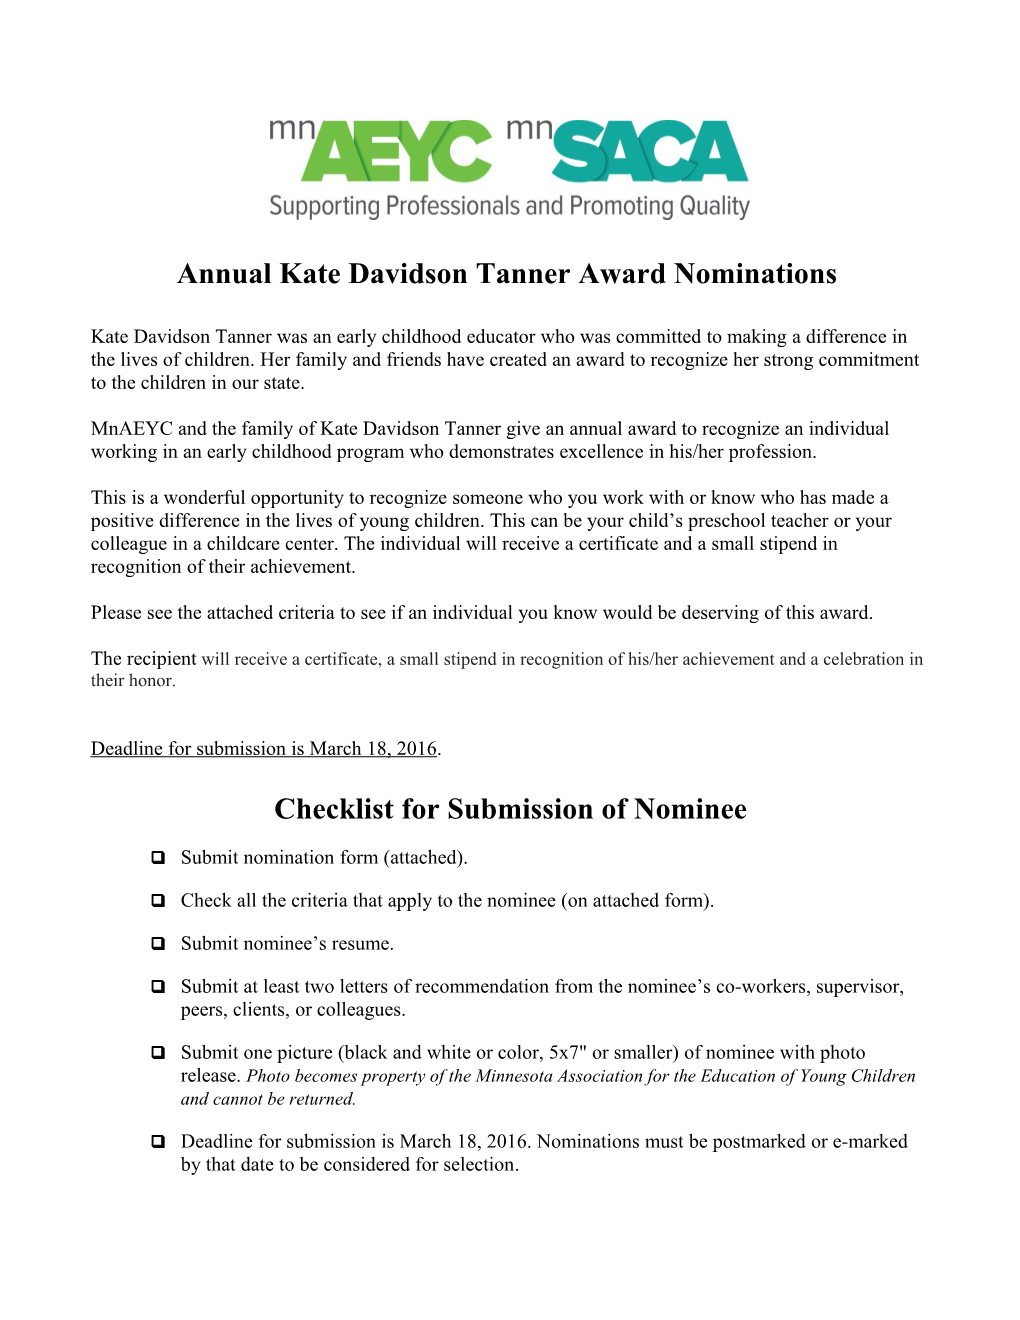 Annual Kate Tanner Award Nominations Being Accepted